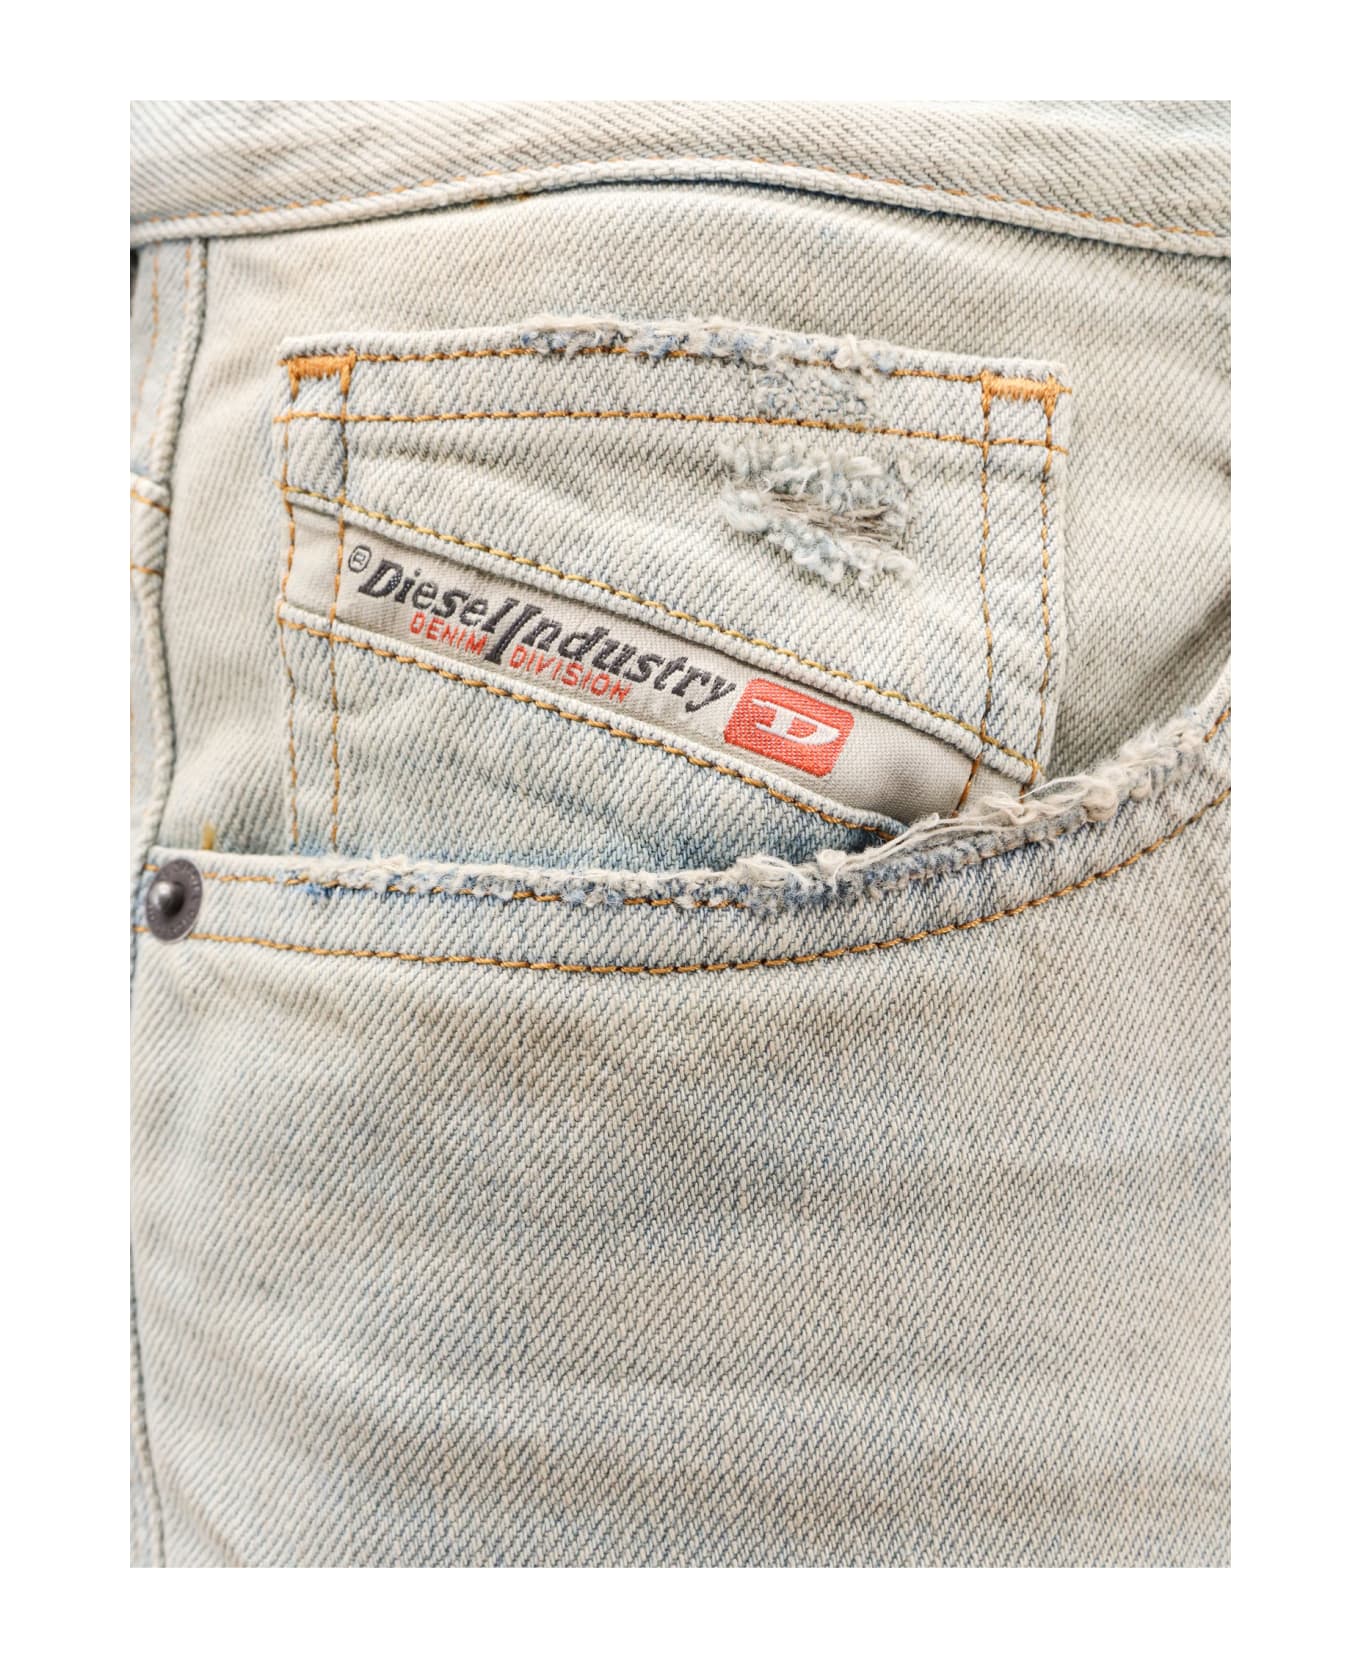 Diesel 1996 D-sire Jeans - Washed